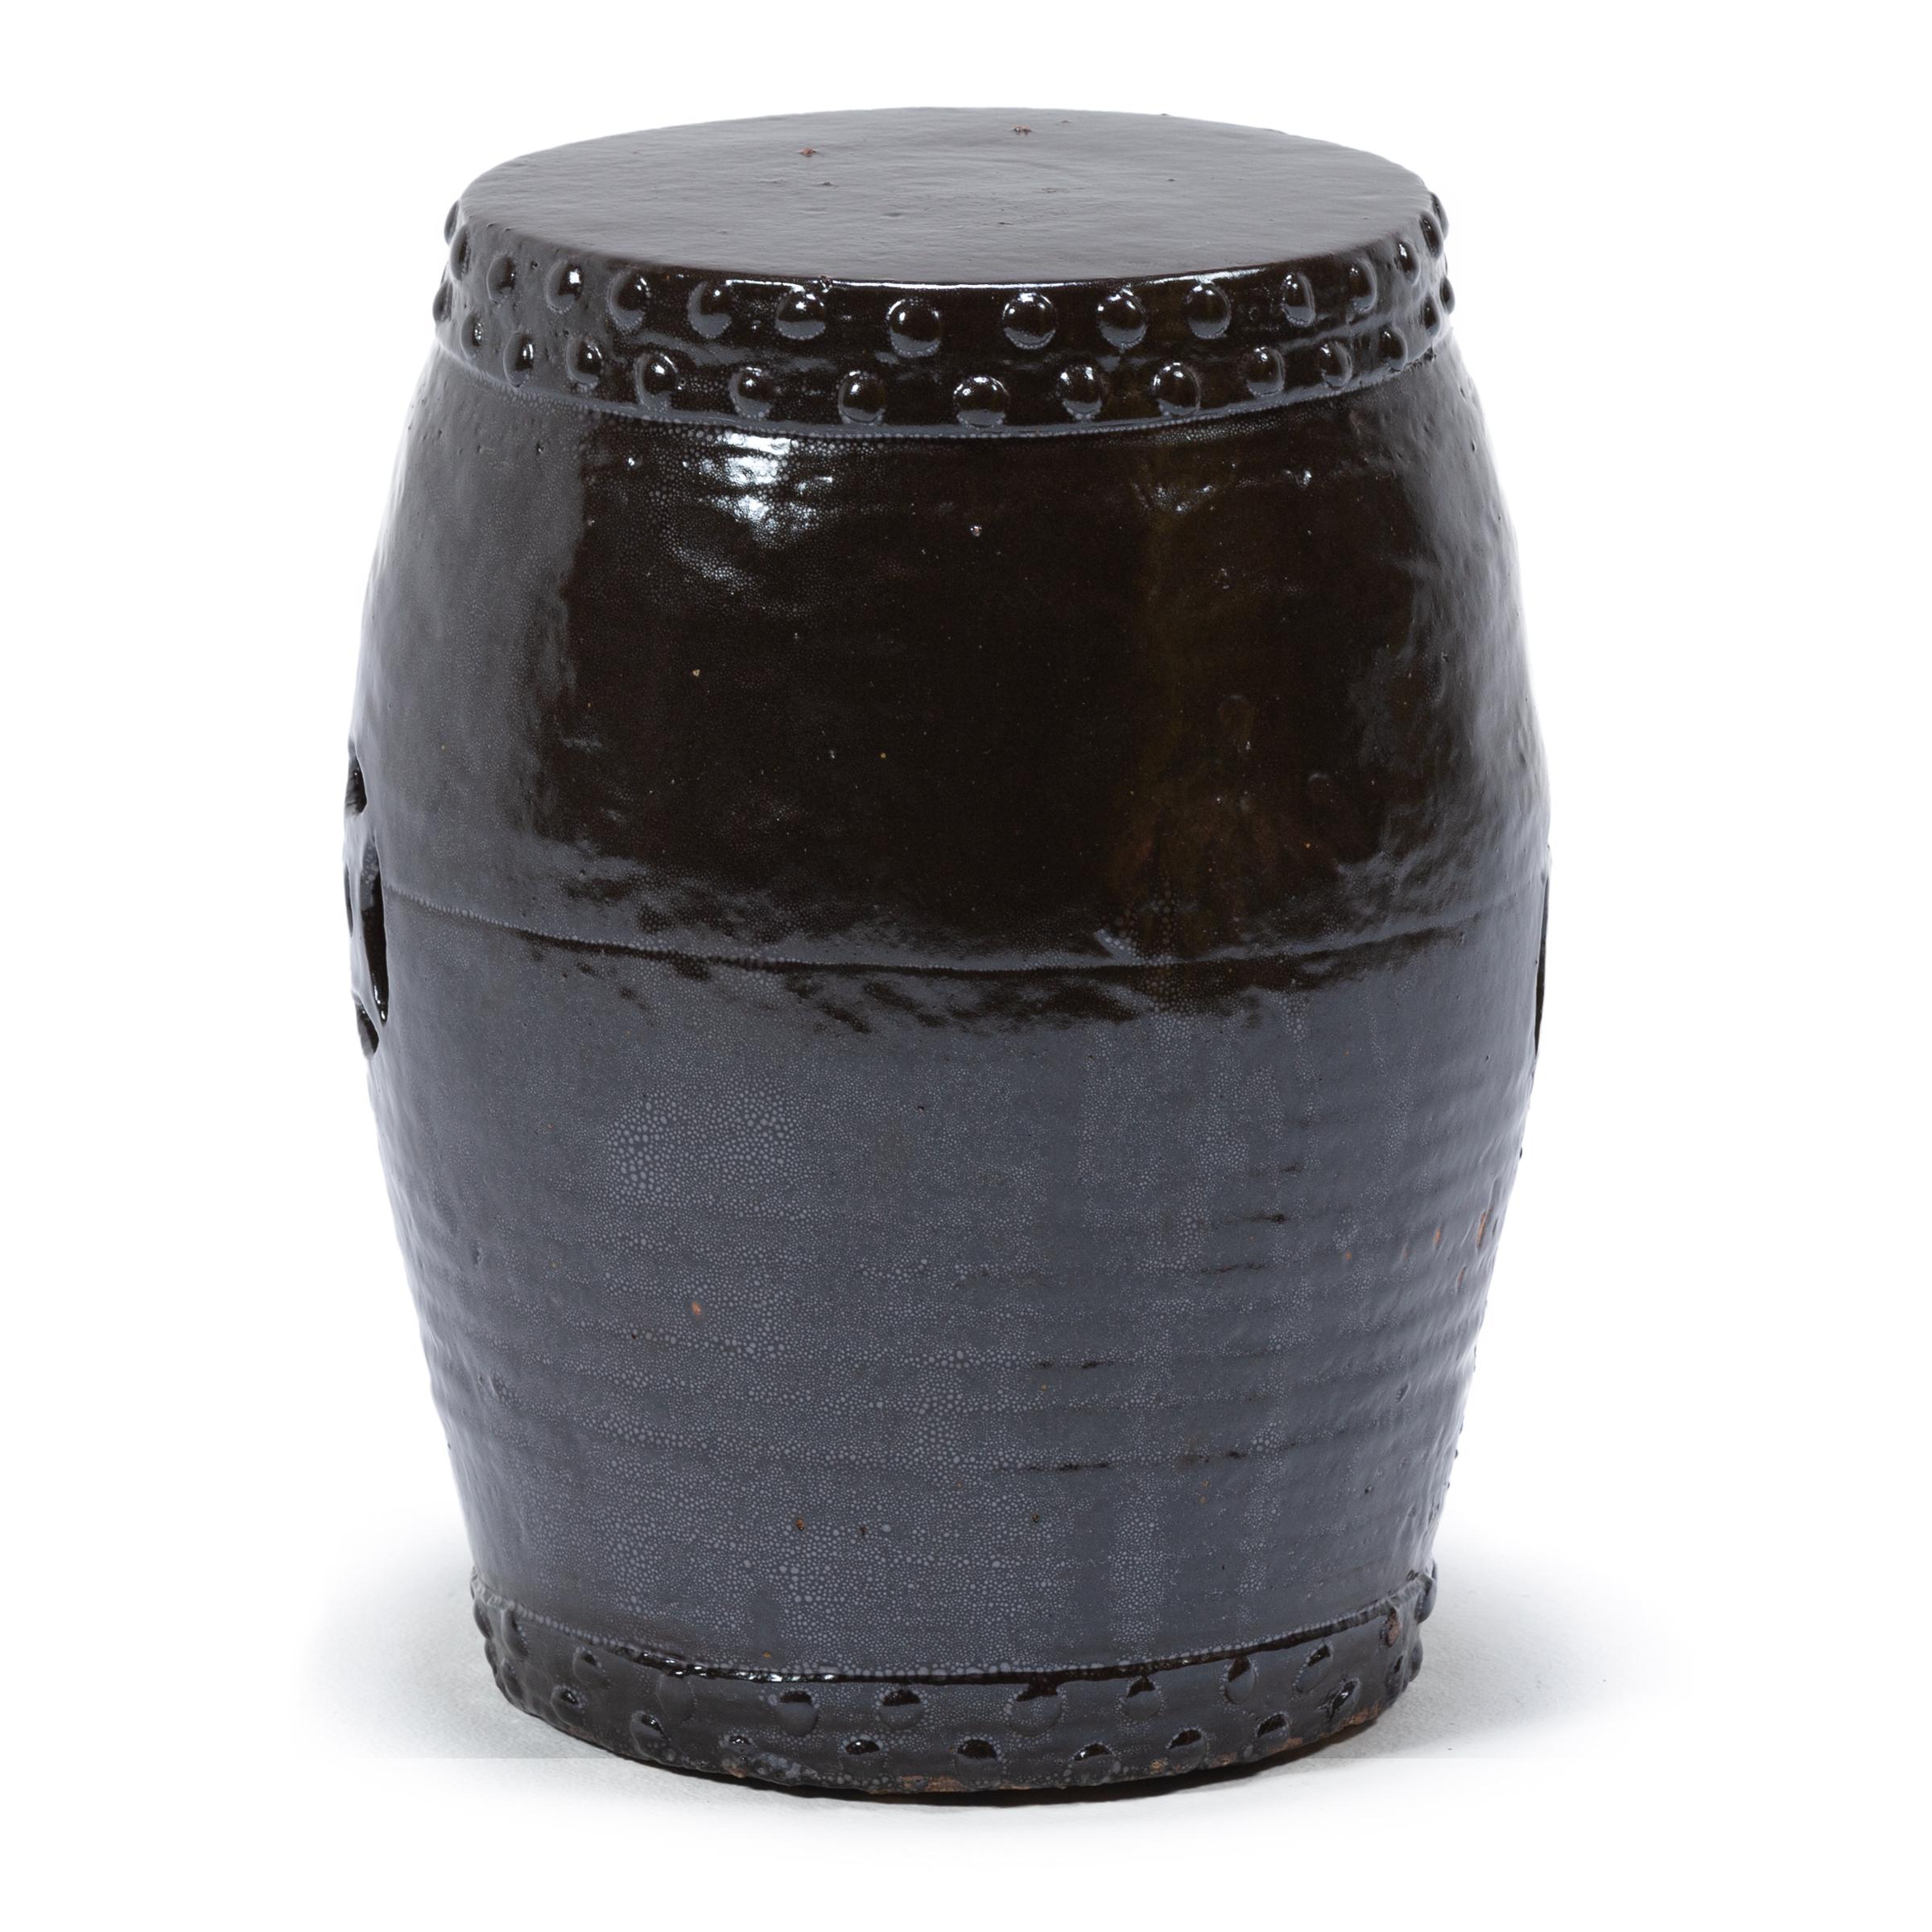 This early 20th-century ceramic garden stool from China's Zhejiang province keeps with tradition with its simple drum-form shape, cloaked in a dark brown-black glaze. Ringing both the top and bottom is a pattern of boss-head nails that imitate those